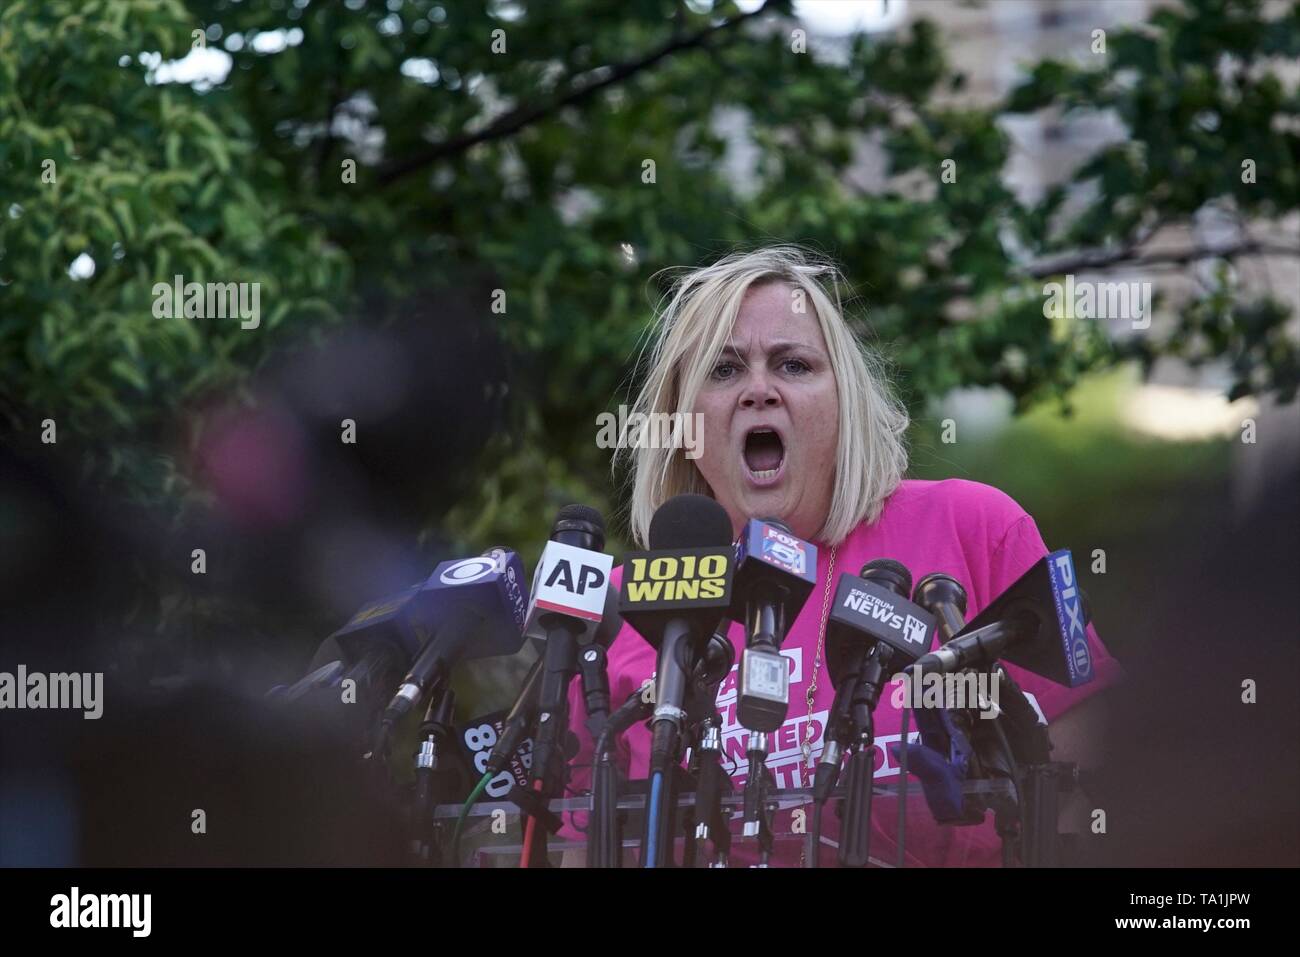 May 20, 2019: New York, New York, U.S.: LAURA MCQUADE, President and CEO of Planned Parenthood New York City, speaks to pro-choice advocates and supporters during an 'Against Abortion Bans' rally at Foley Square. Credit: Wes Bruer/ZUMA Wire/Alamy Live News Stock Photo